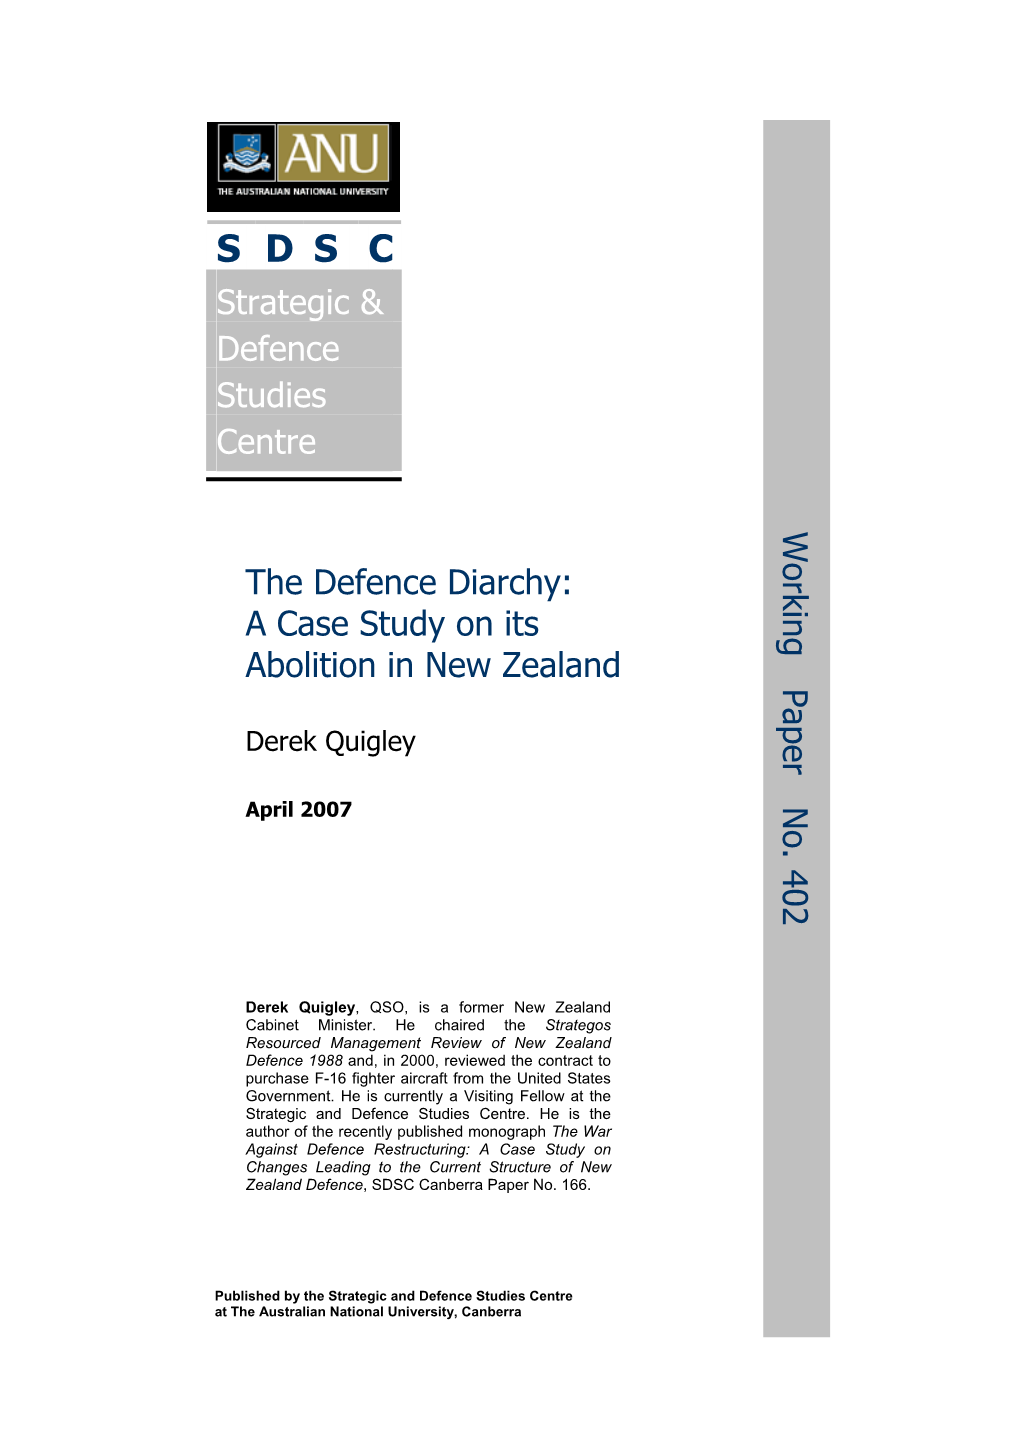 The Defence Diarchy: a Case Study on Its Abolition in New Zealand